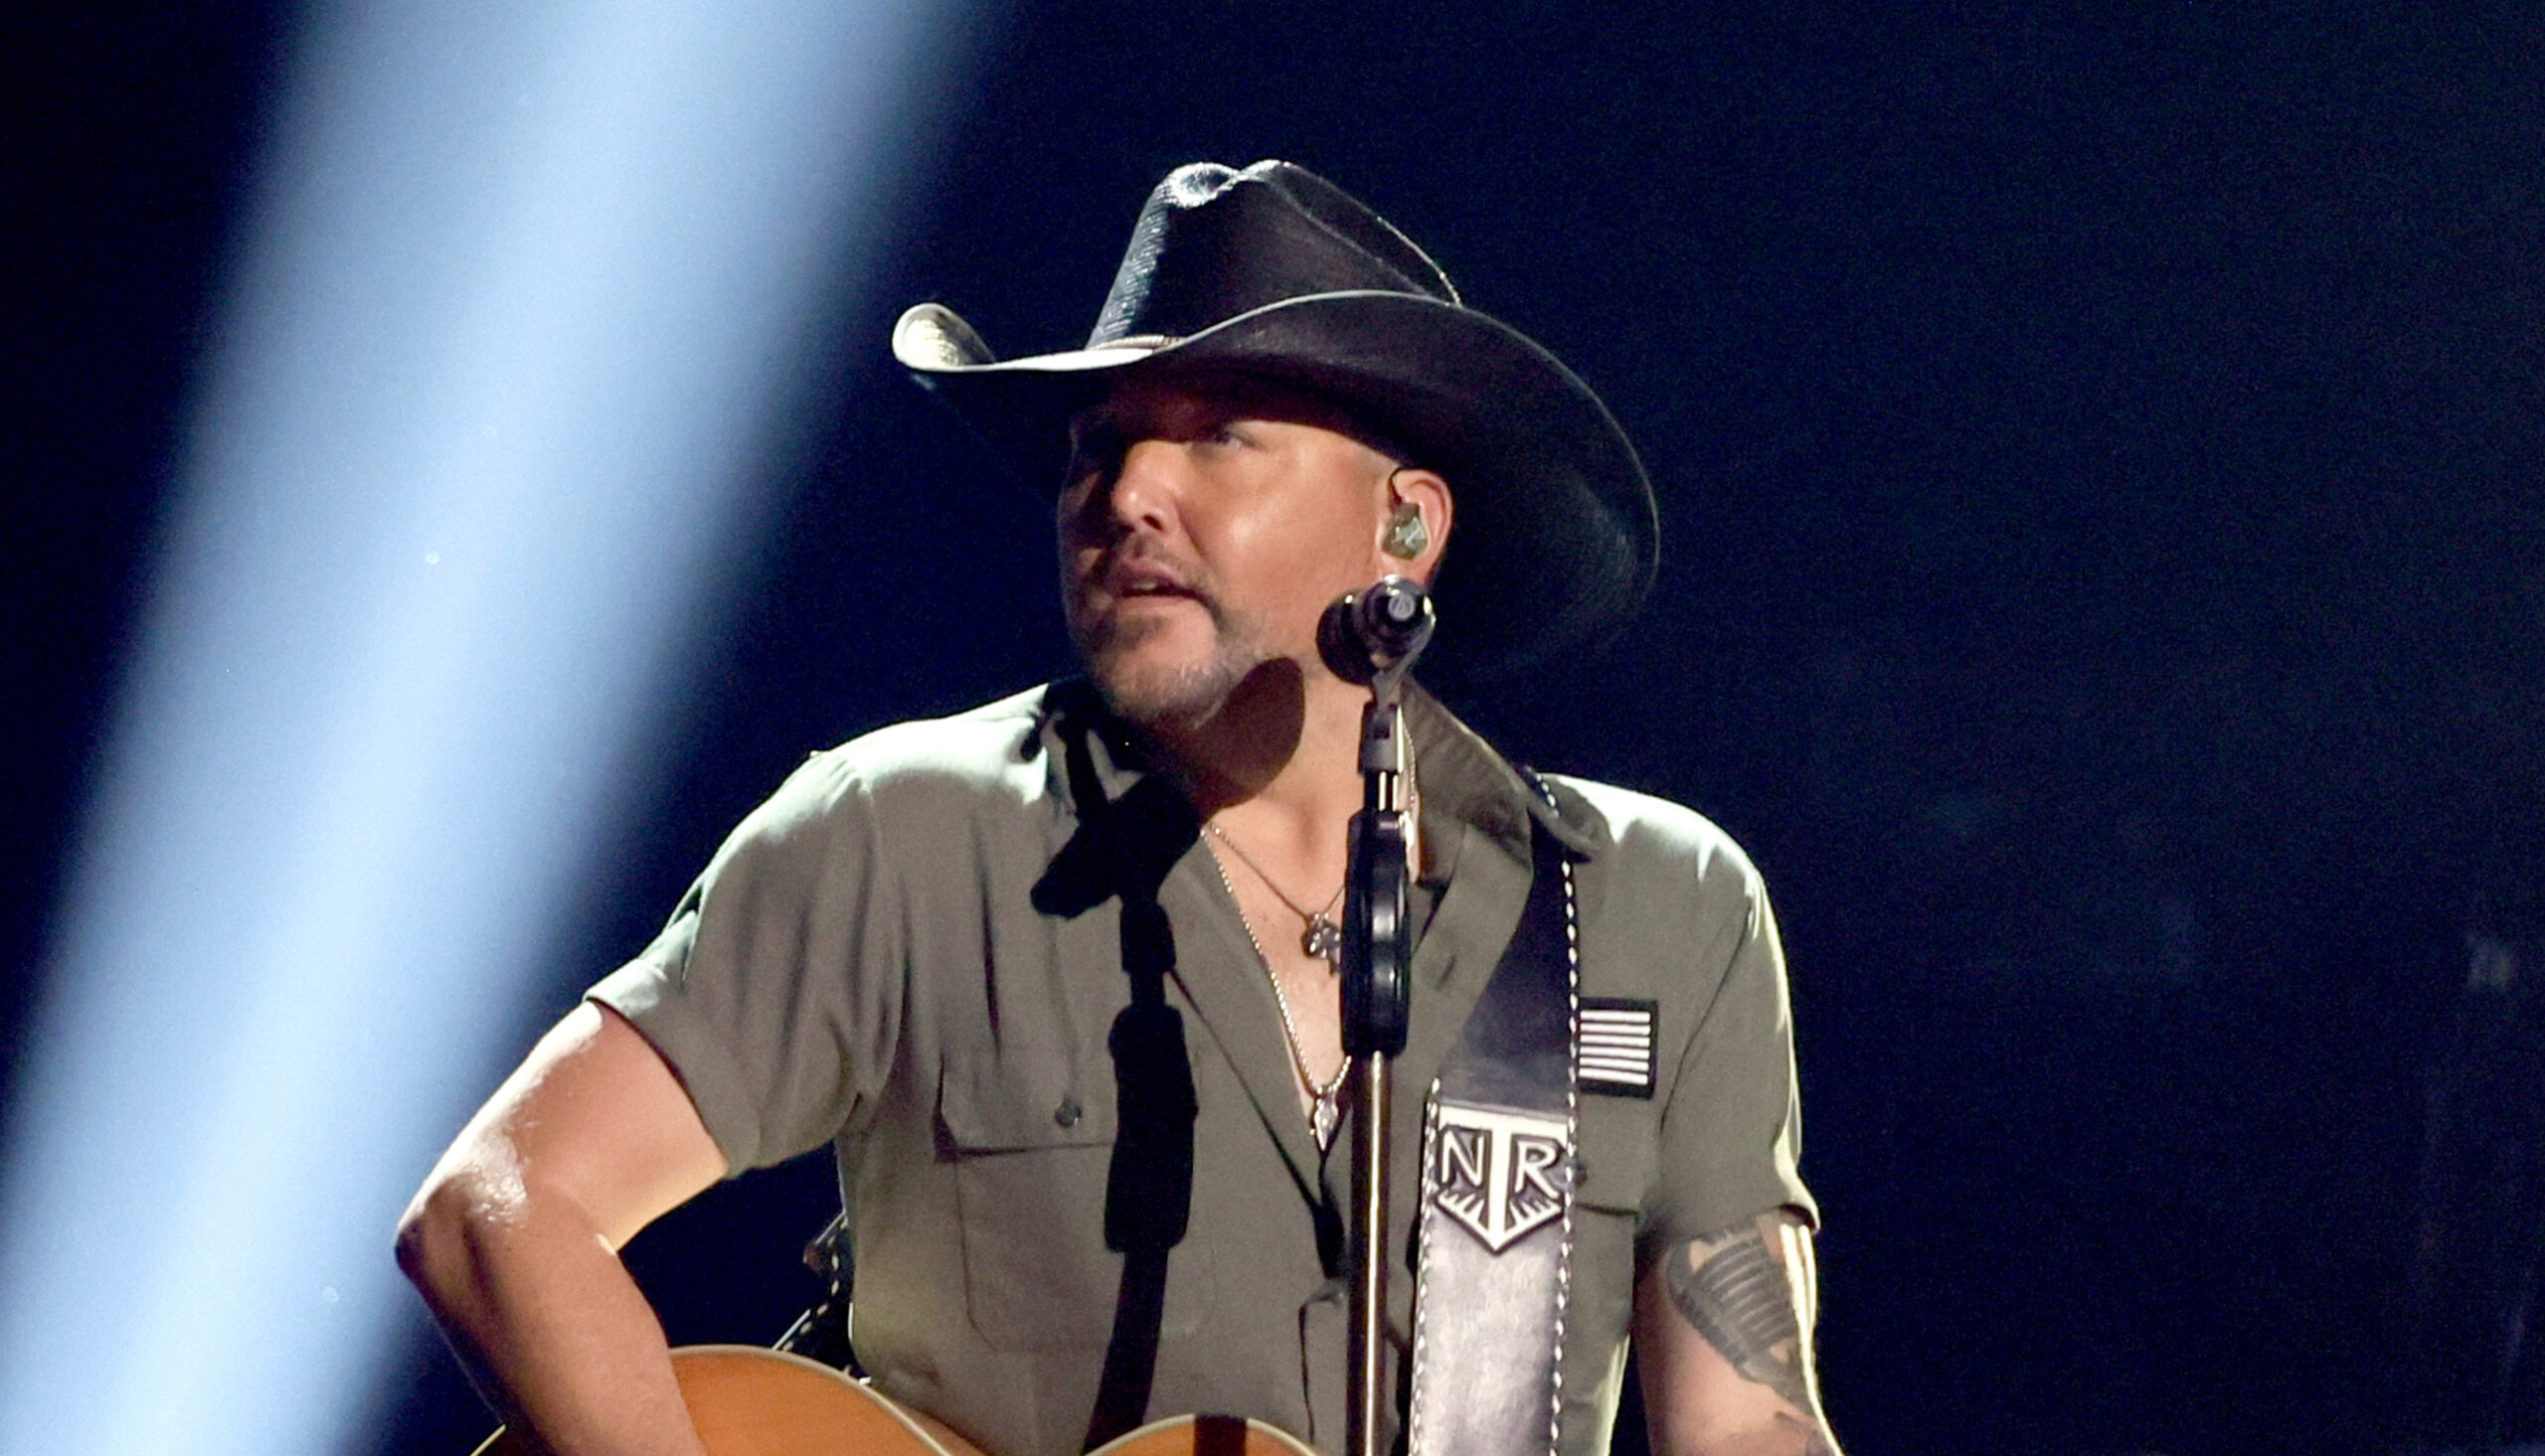 Jason Aldean shares wisdom from late country star on speaking boldly